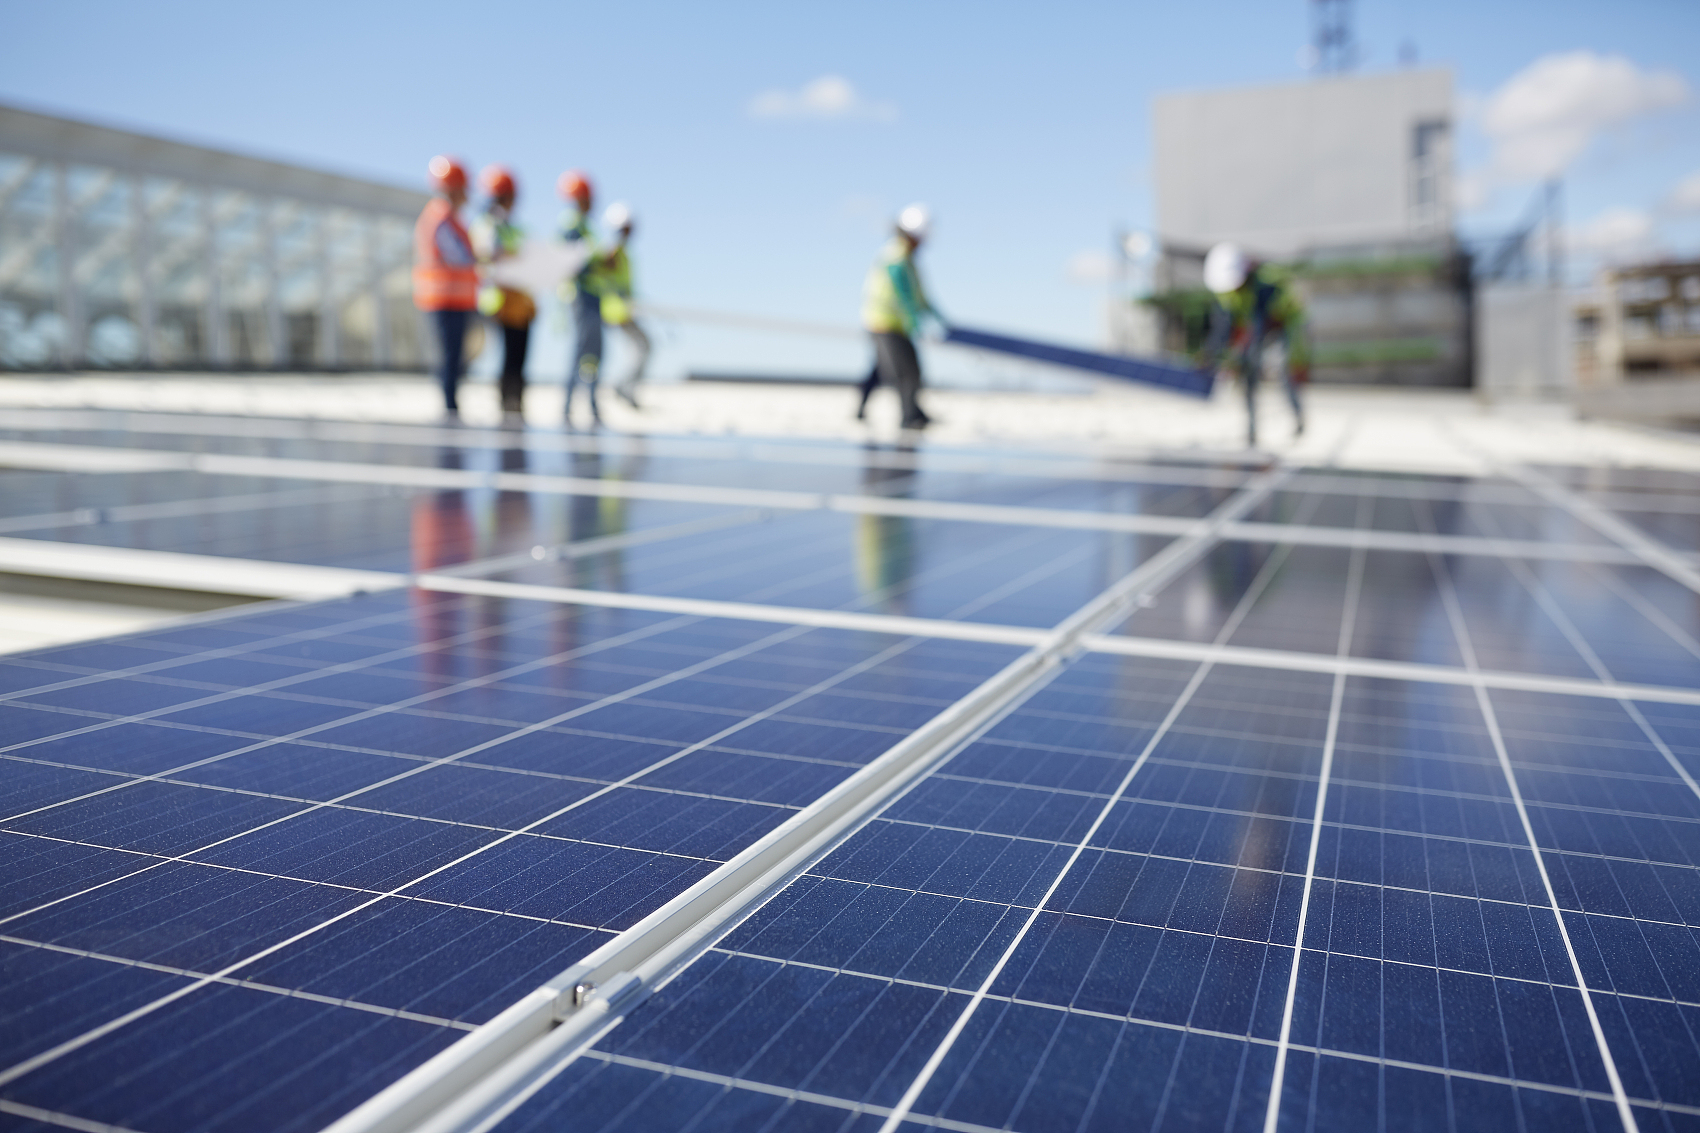 Photovoltaic rises again! Giants such as cement, steel structure, e-commerce, and footwear bring more than 24.1 billion yuan to cross the border